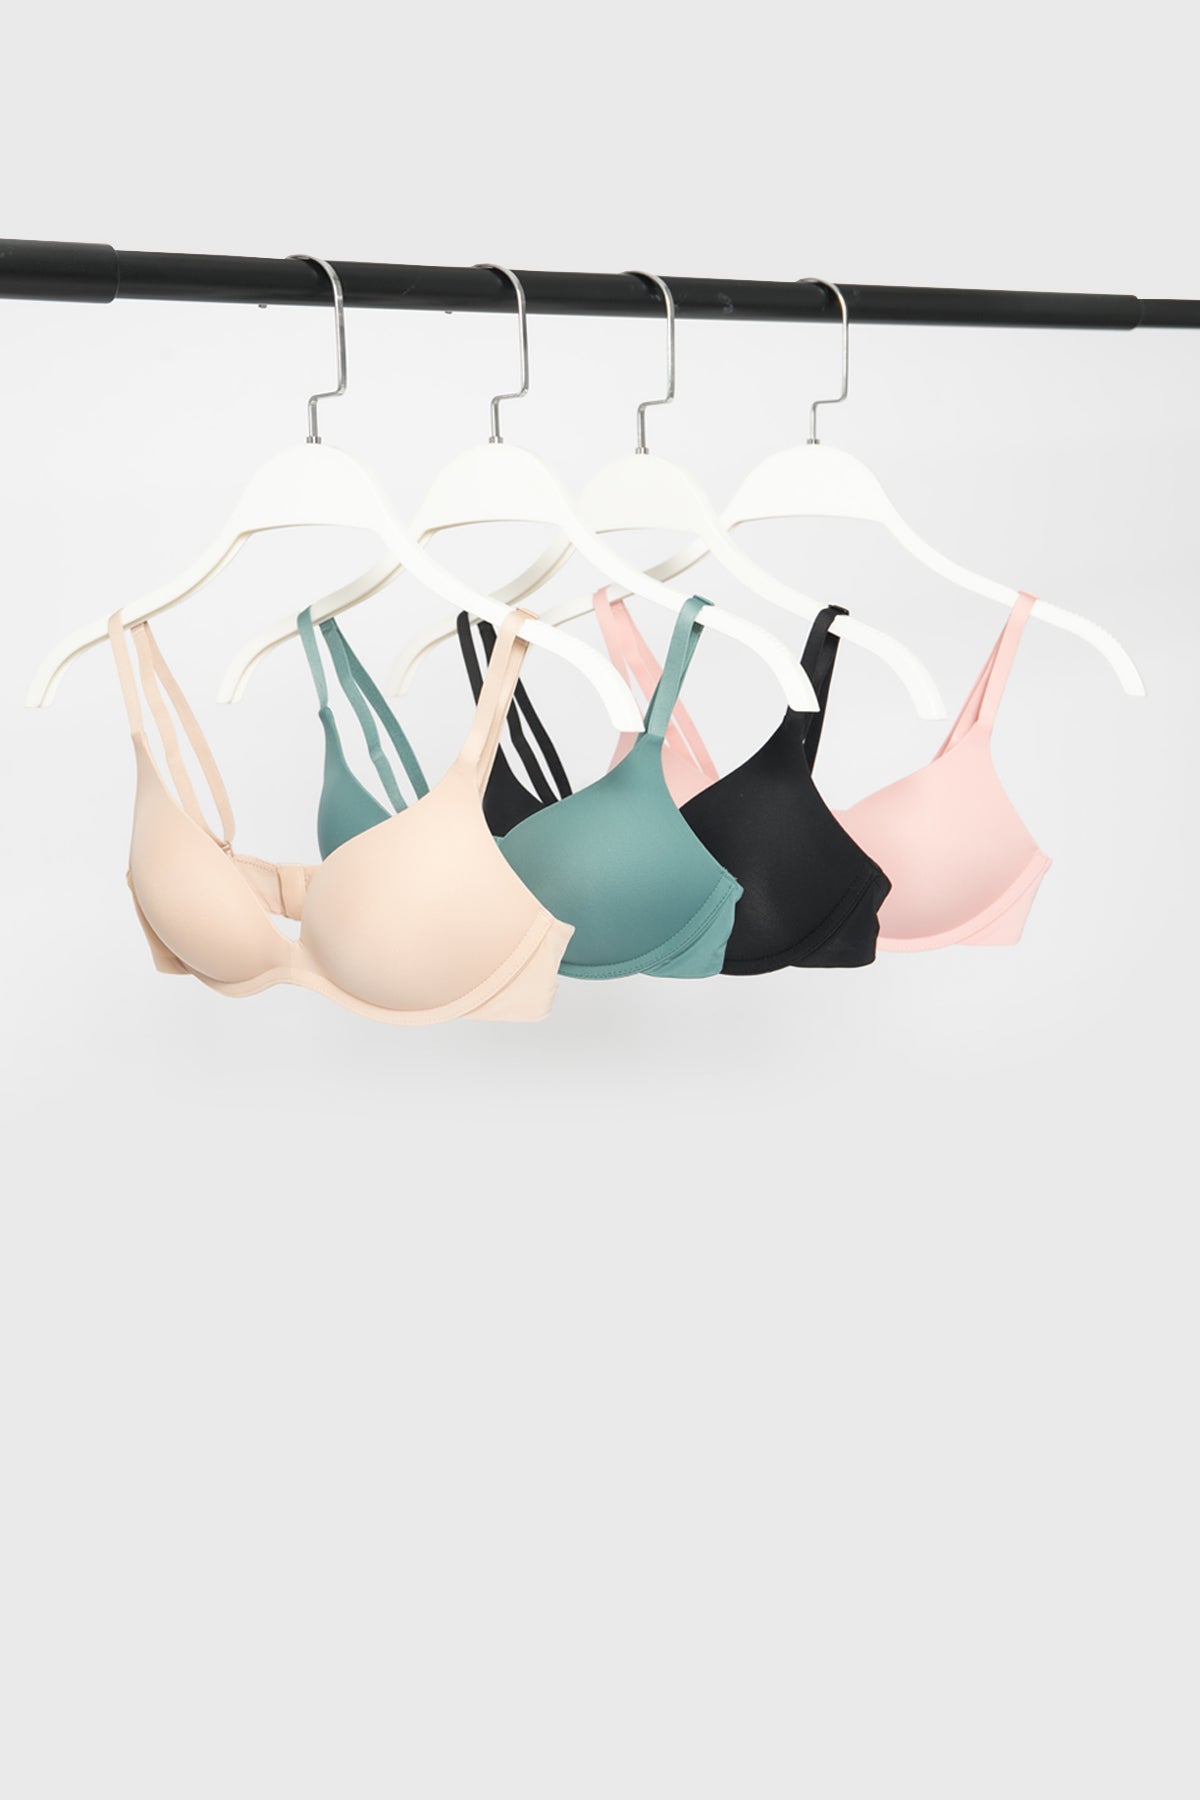 The Daily Bra in Black and Nude Bundle